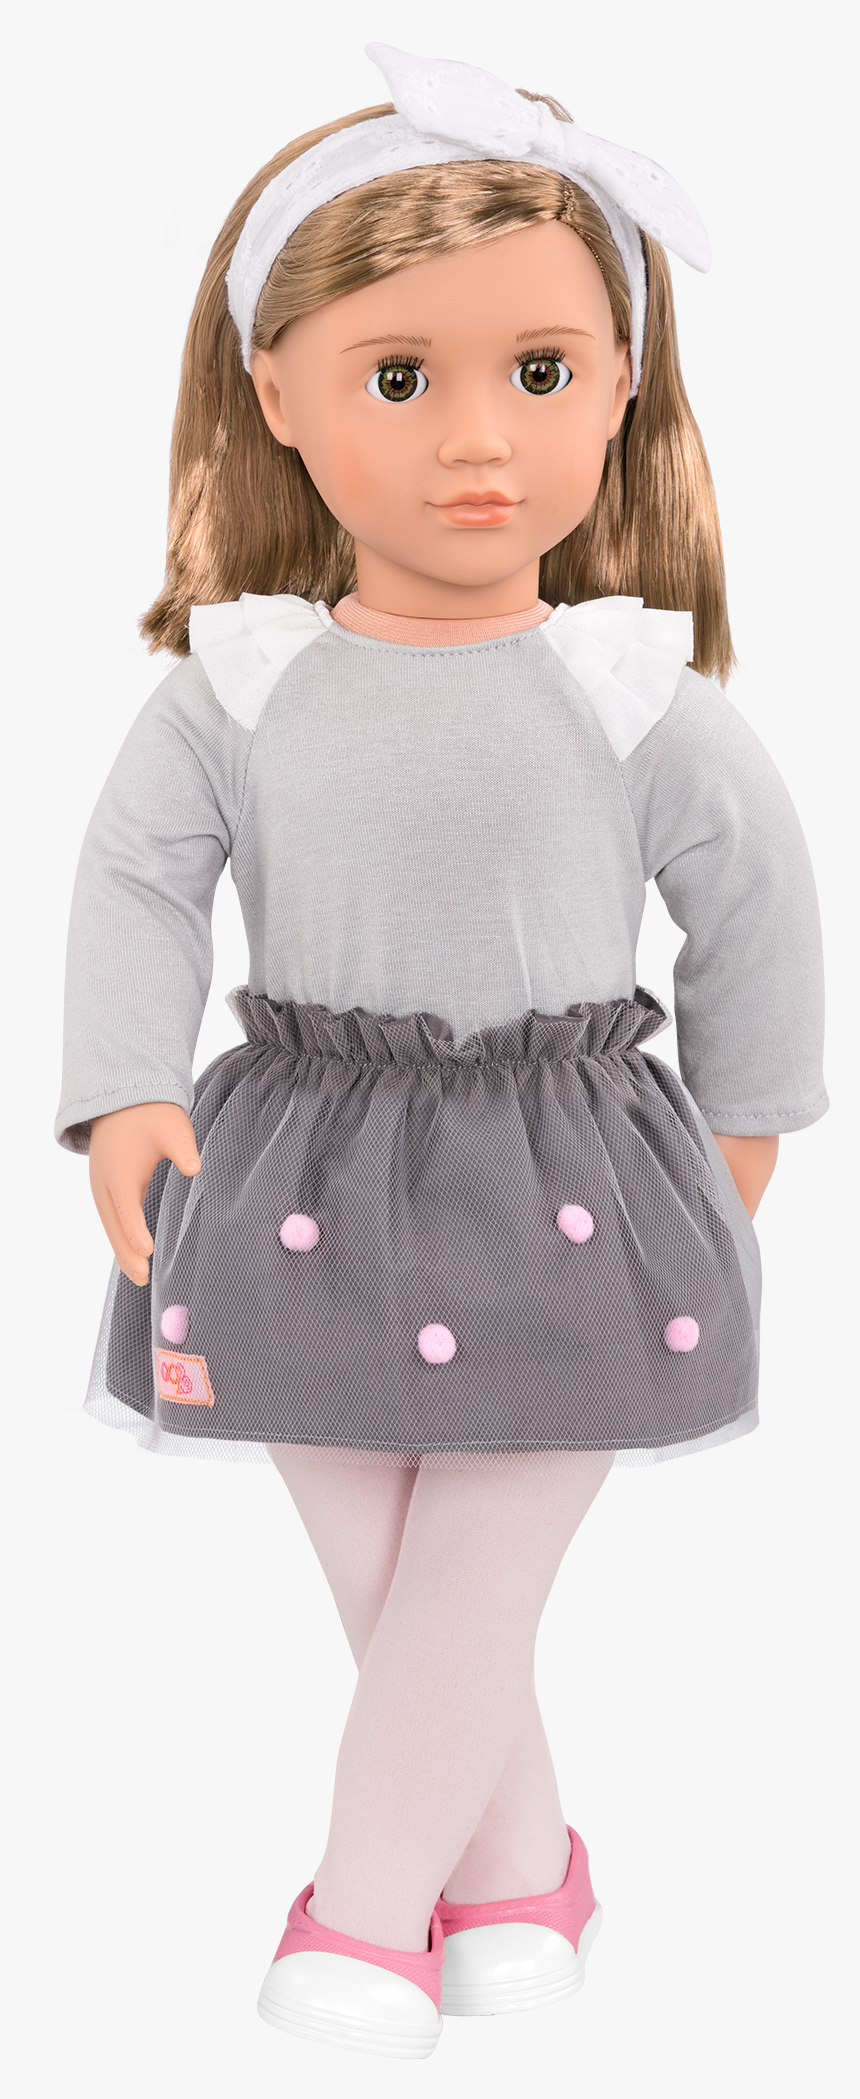 Bina 18-inch Doll With Legs Crossed - New Our Generation Dolls 2019, HD Png Download, Free Download